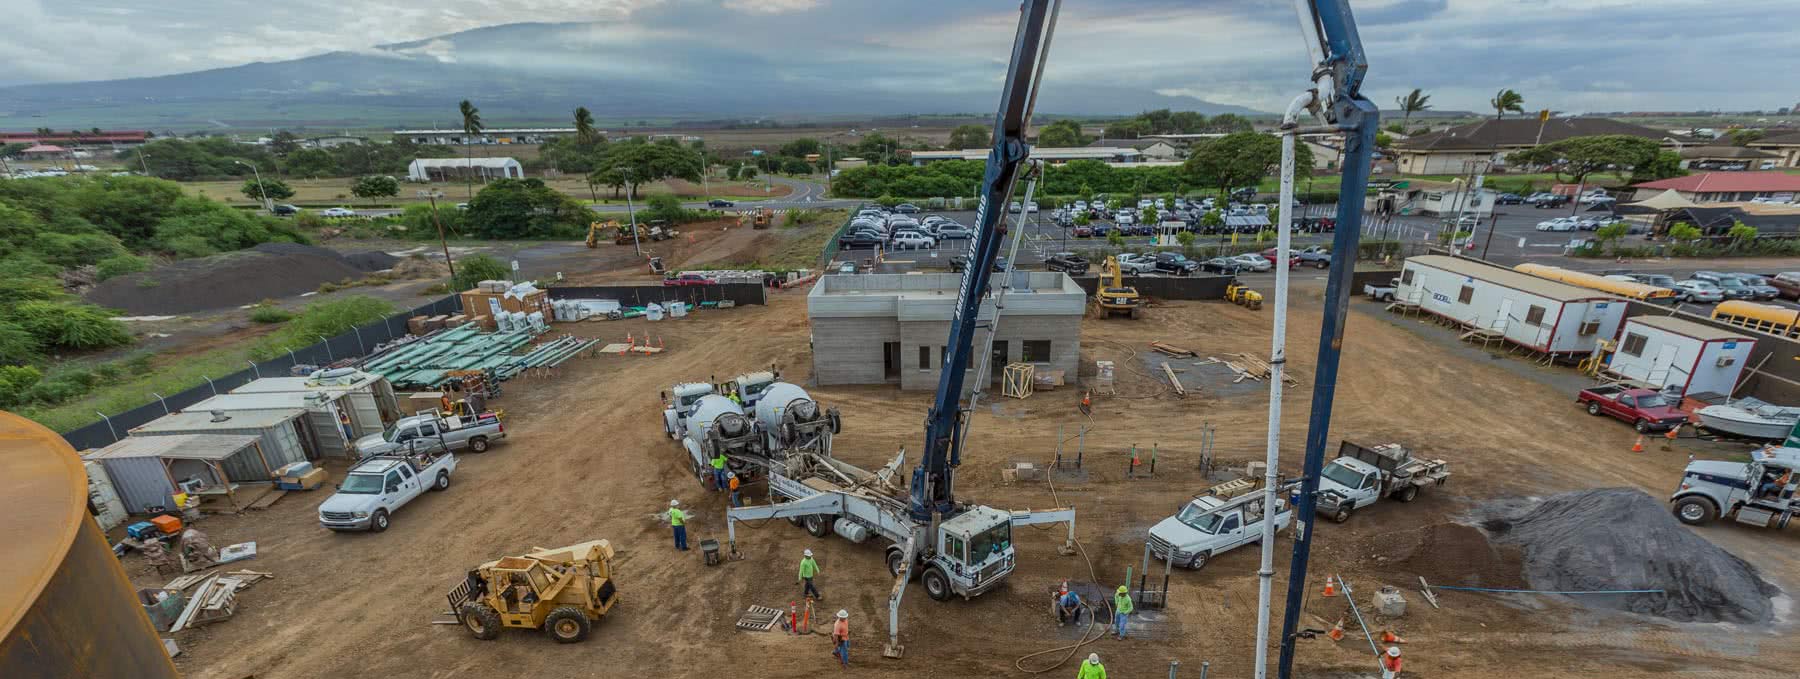 Bodell Construction to Build Jet-A Storage Facility at Kaonawai Place